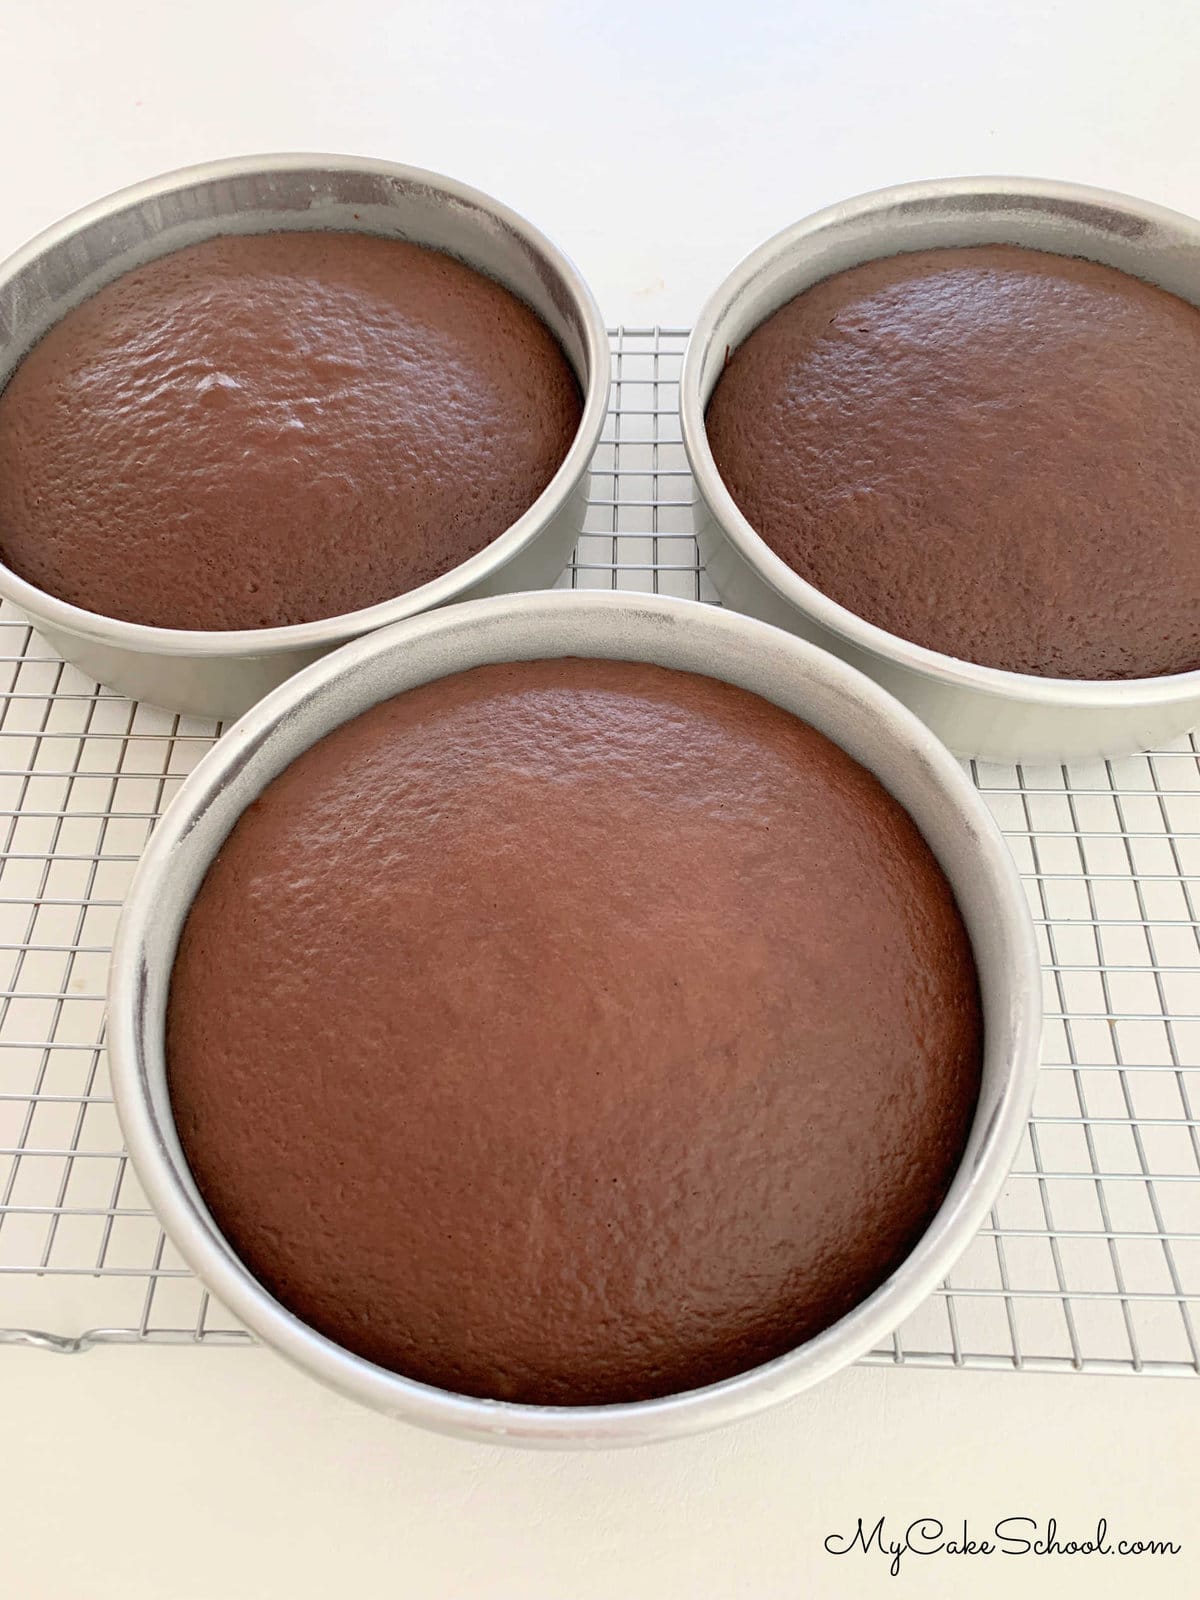 Baked Chocolate Cake Layers in Pans.